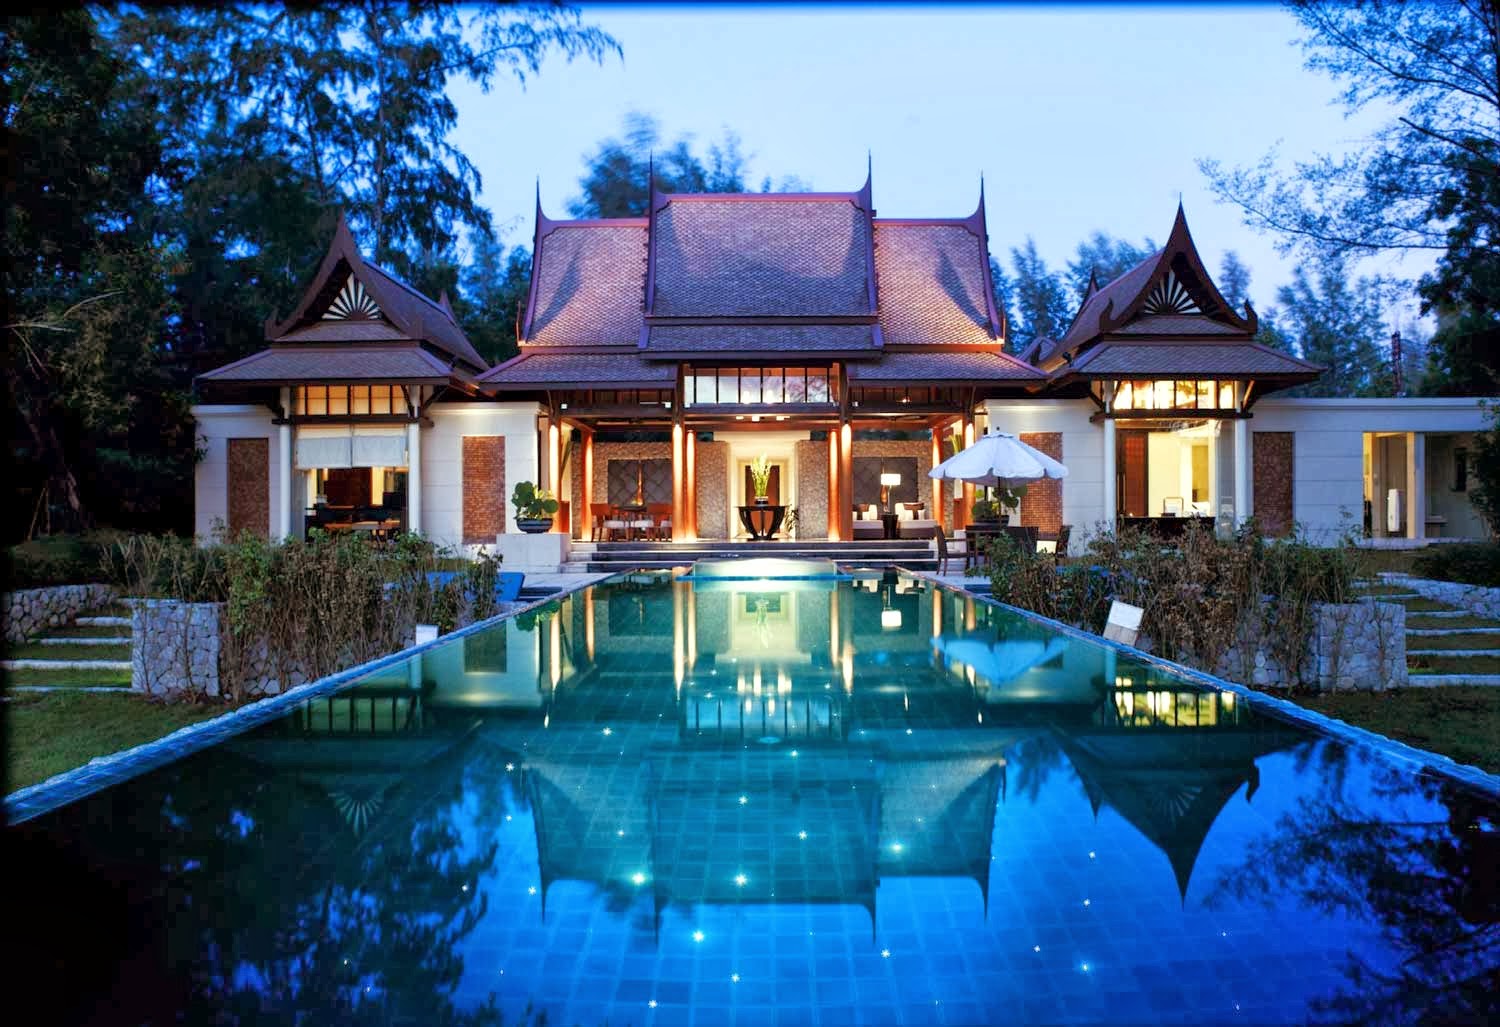 World Visits: Plane Of Vacation - Luxury Villa | Houses